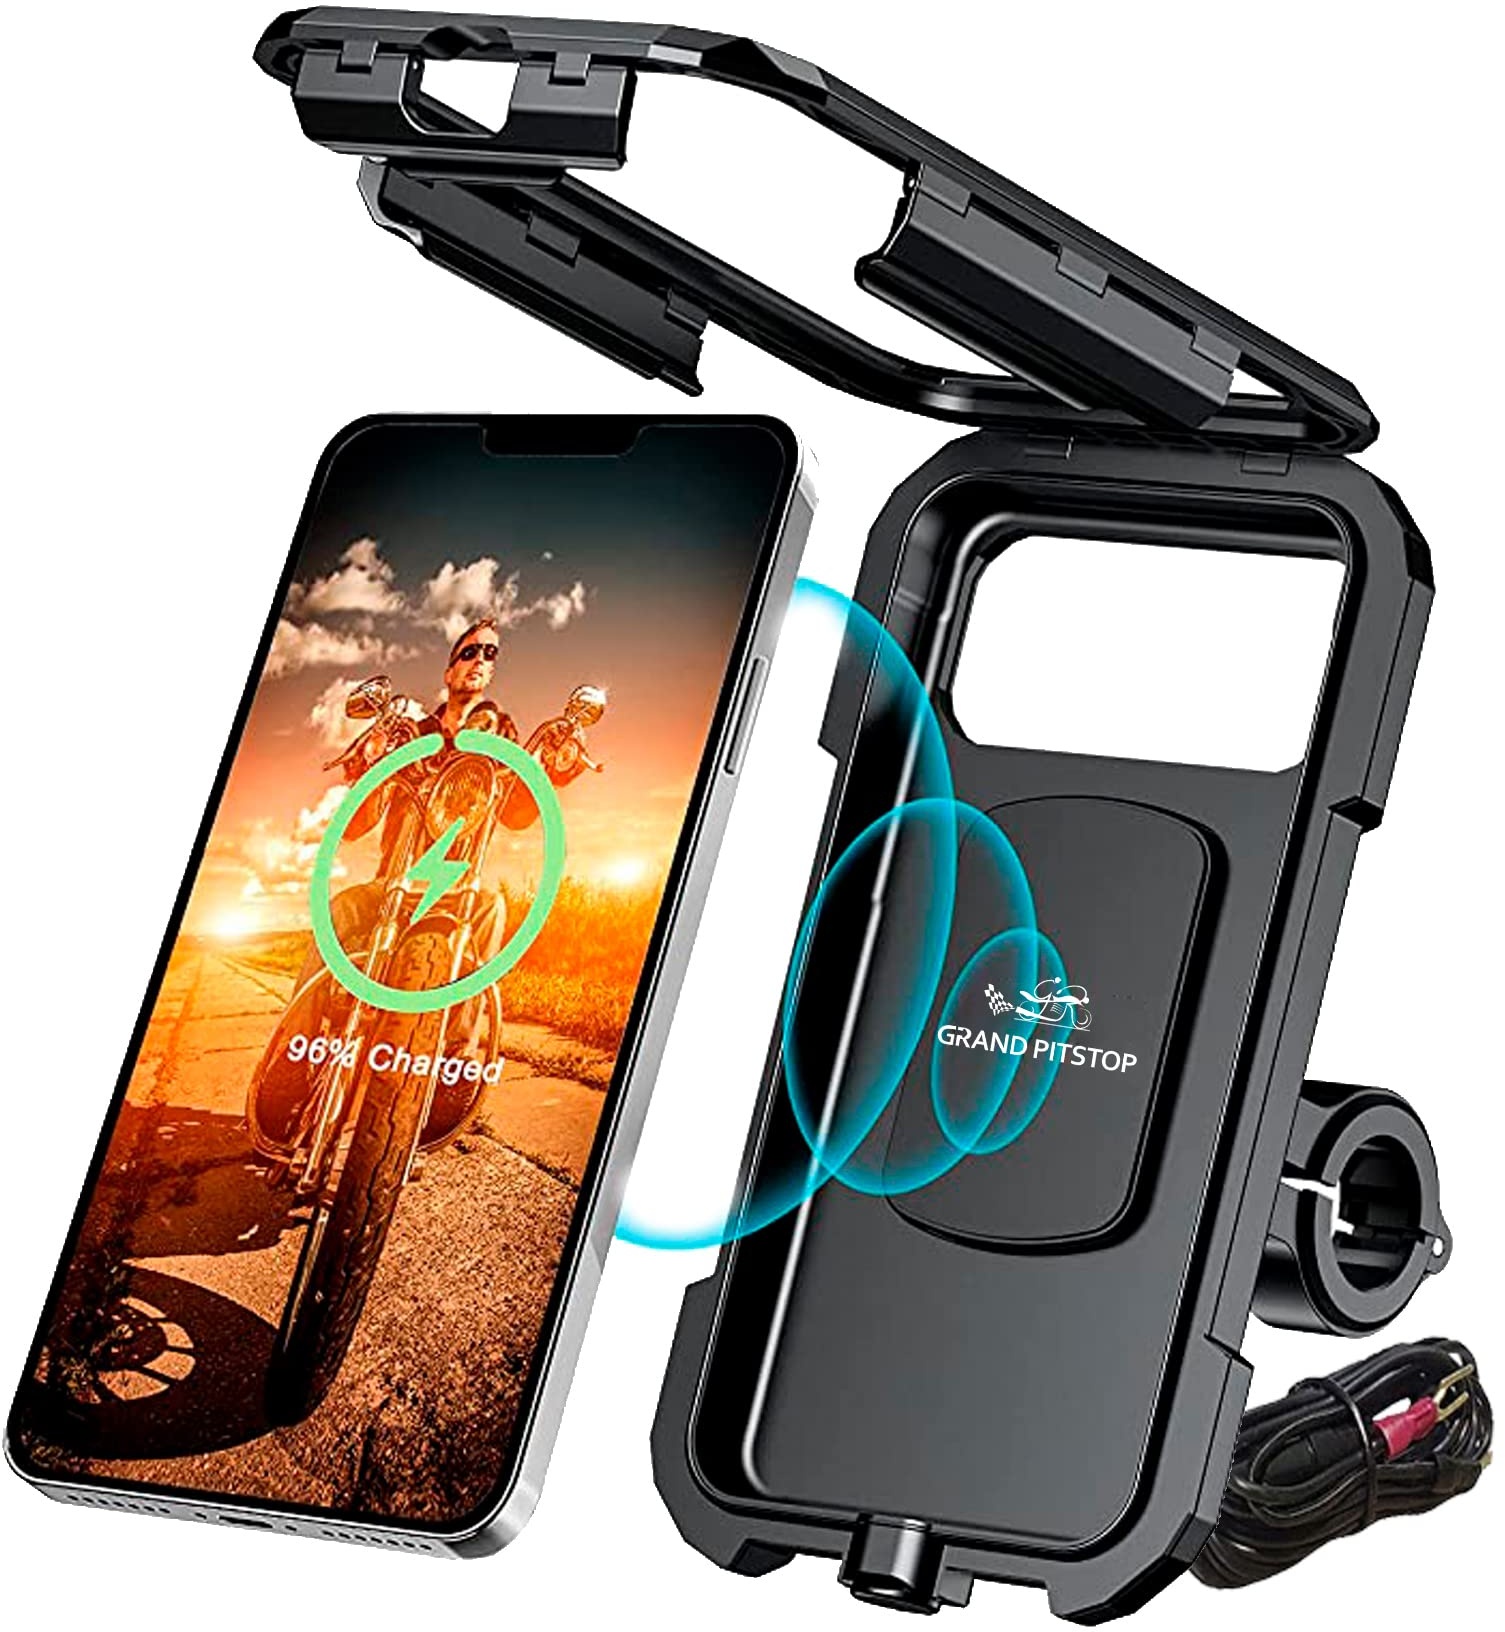 Grandpitstop -Waterproof Handlebar Fully Waterproof Bike / Motorcycle / Scooter Mobile Phone Holder Mount With Fast 15W Wireless & Usb-C Input/Output Charger, Ideal For Maps And Gps Navigation - Black